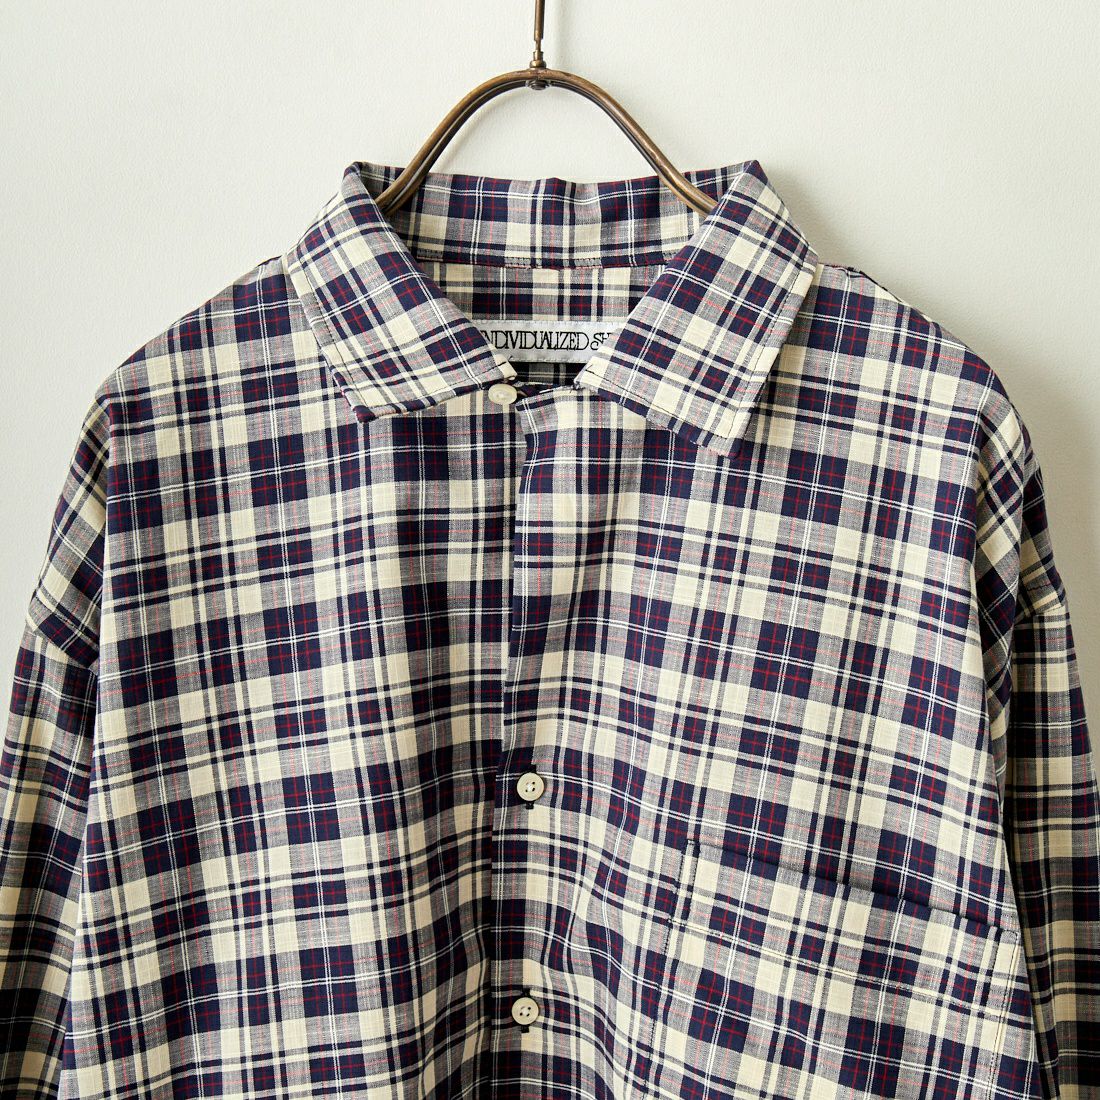 INDIVIDUALIZED SHIRTS [インディビジュアライズド シャツ] 別注 リラックスフィット チェックシャツ [IS200016000-JF] A70NBP-L